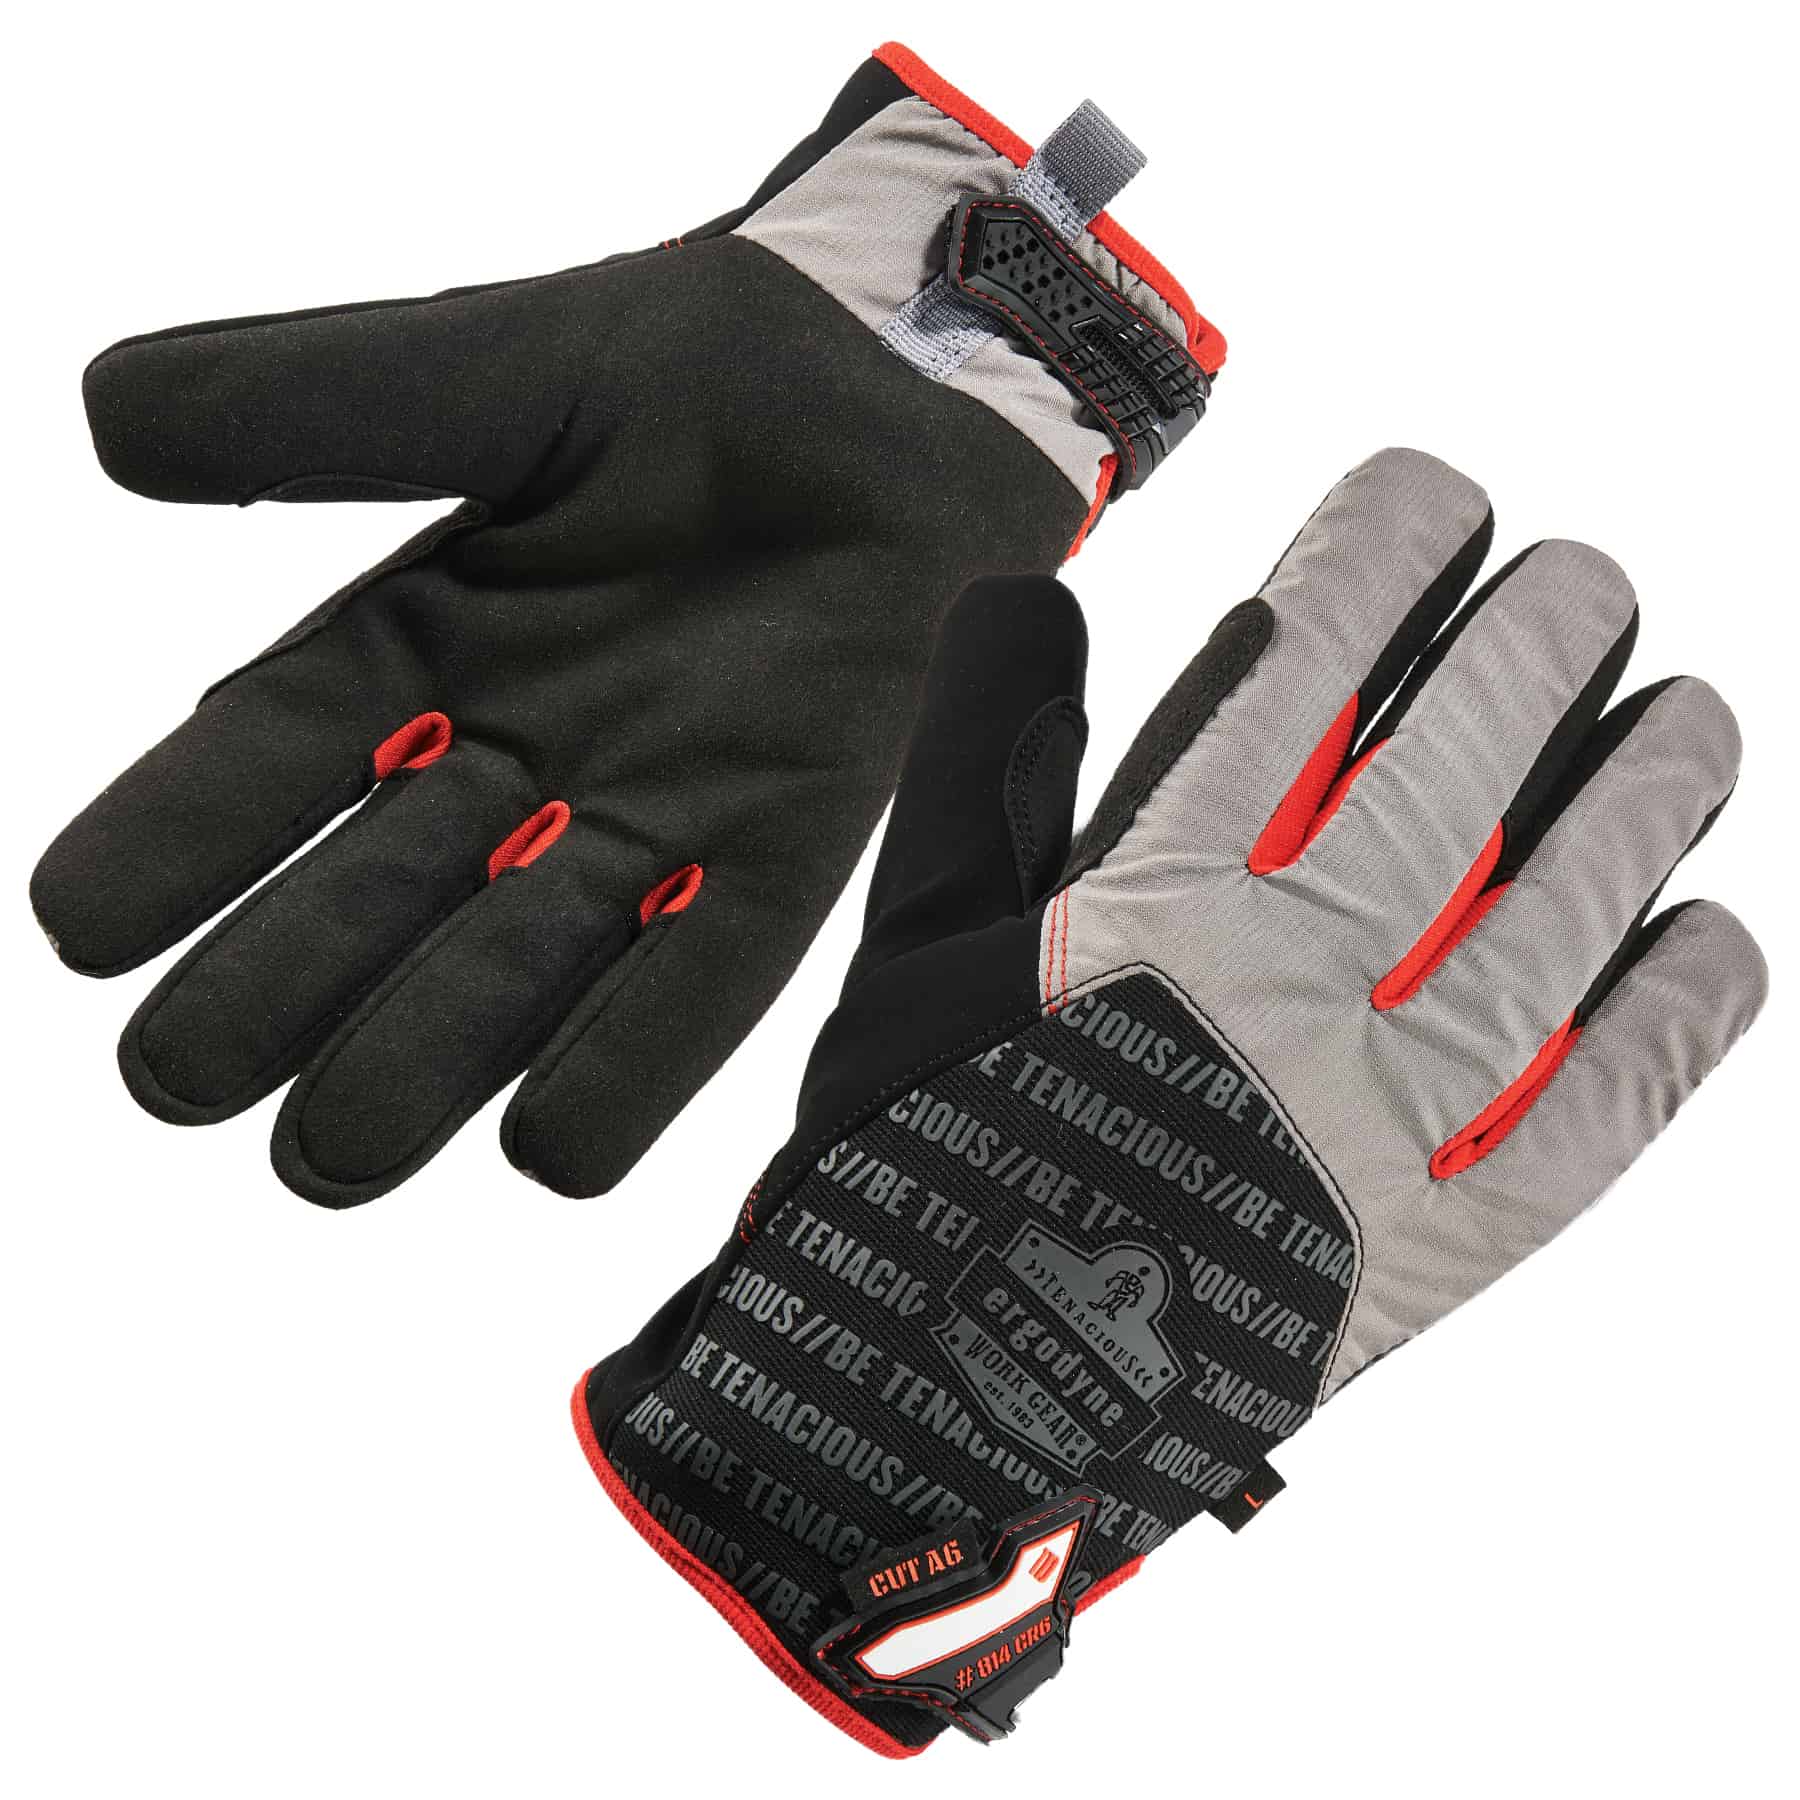 Big Red Cut-Resistant Carving Glove